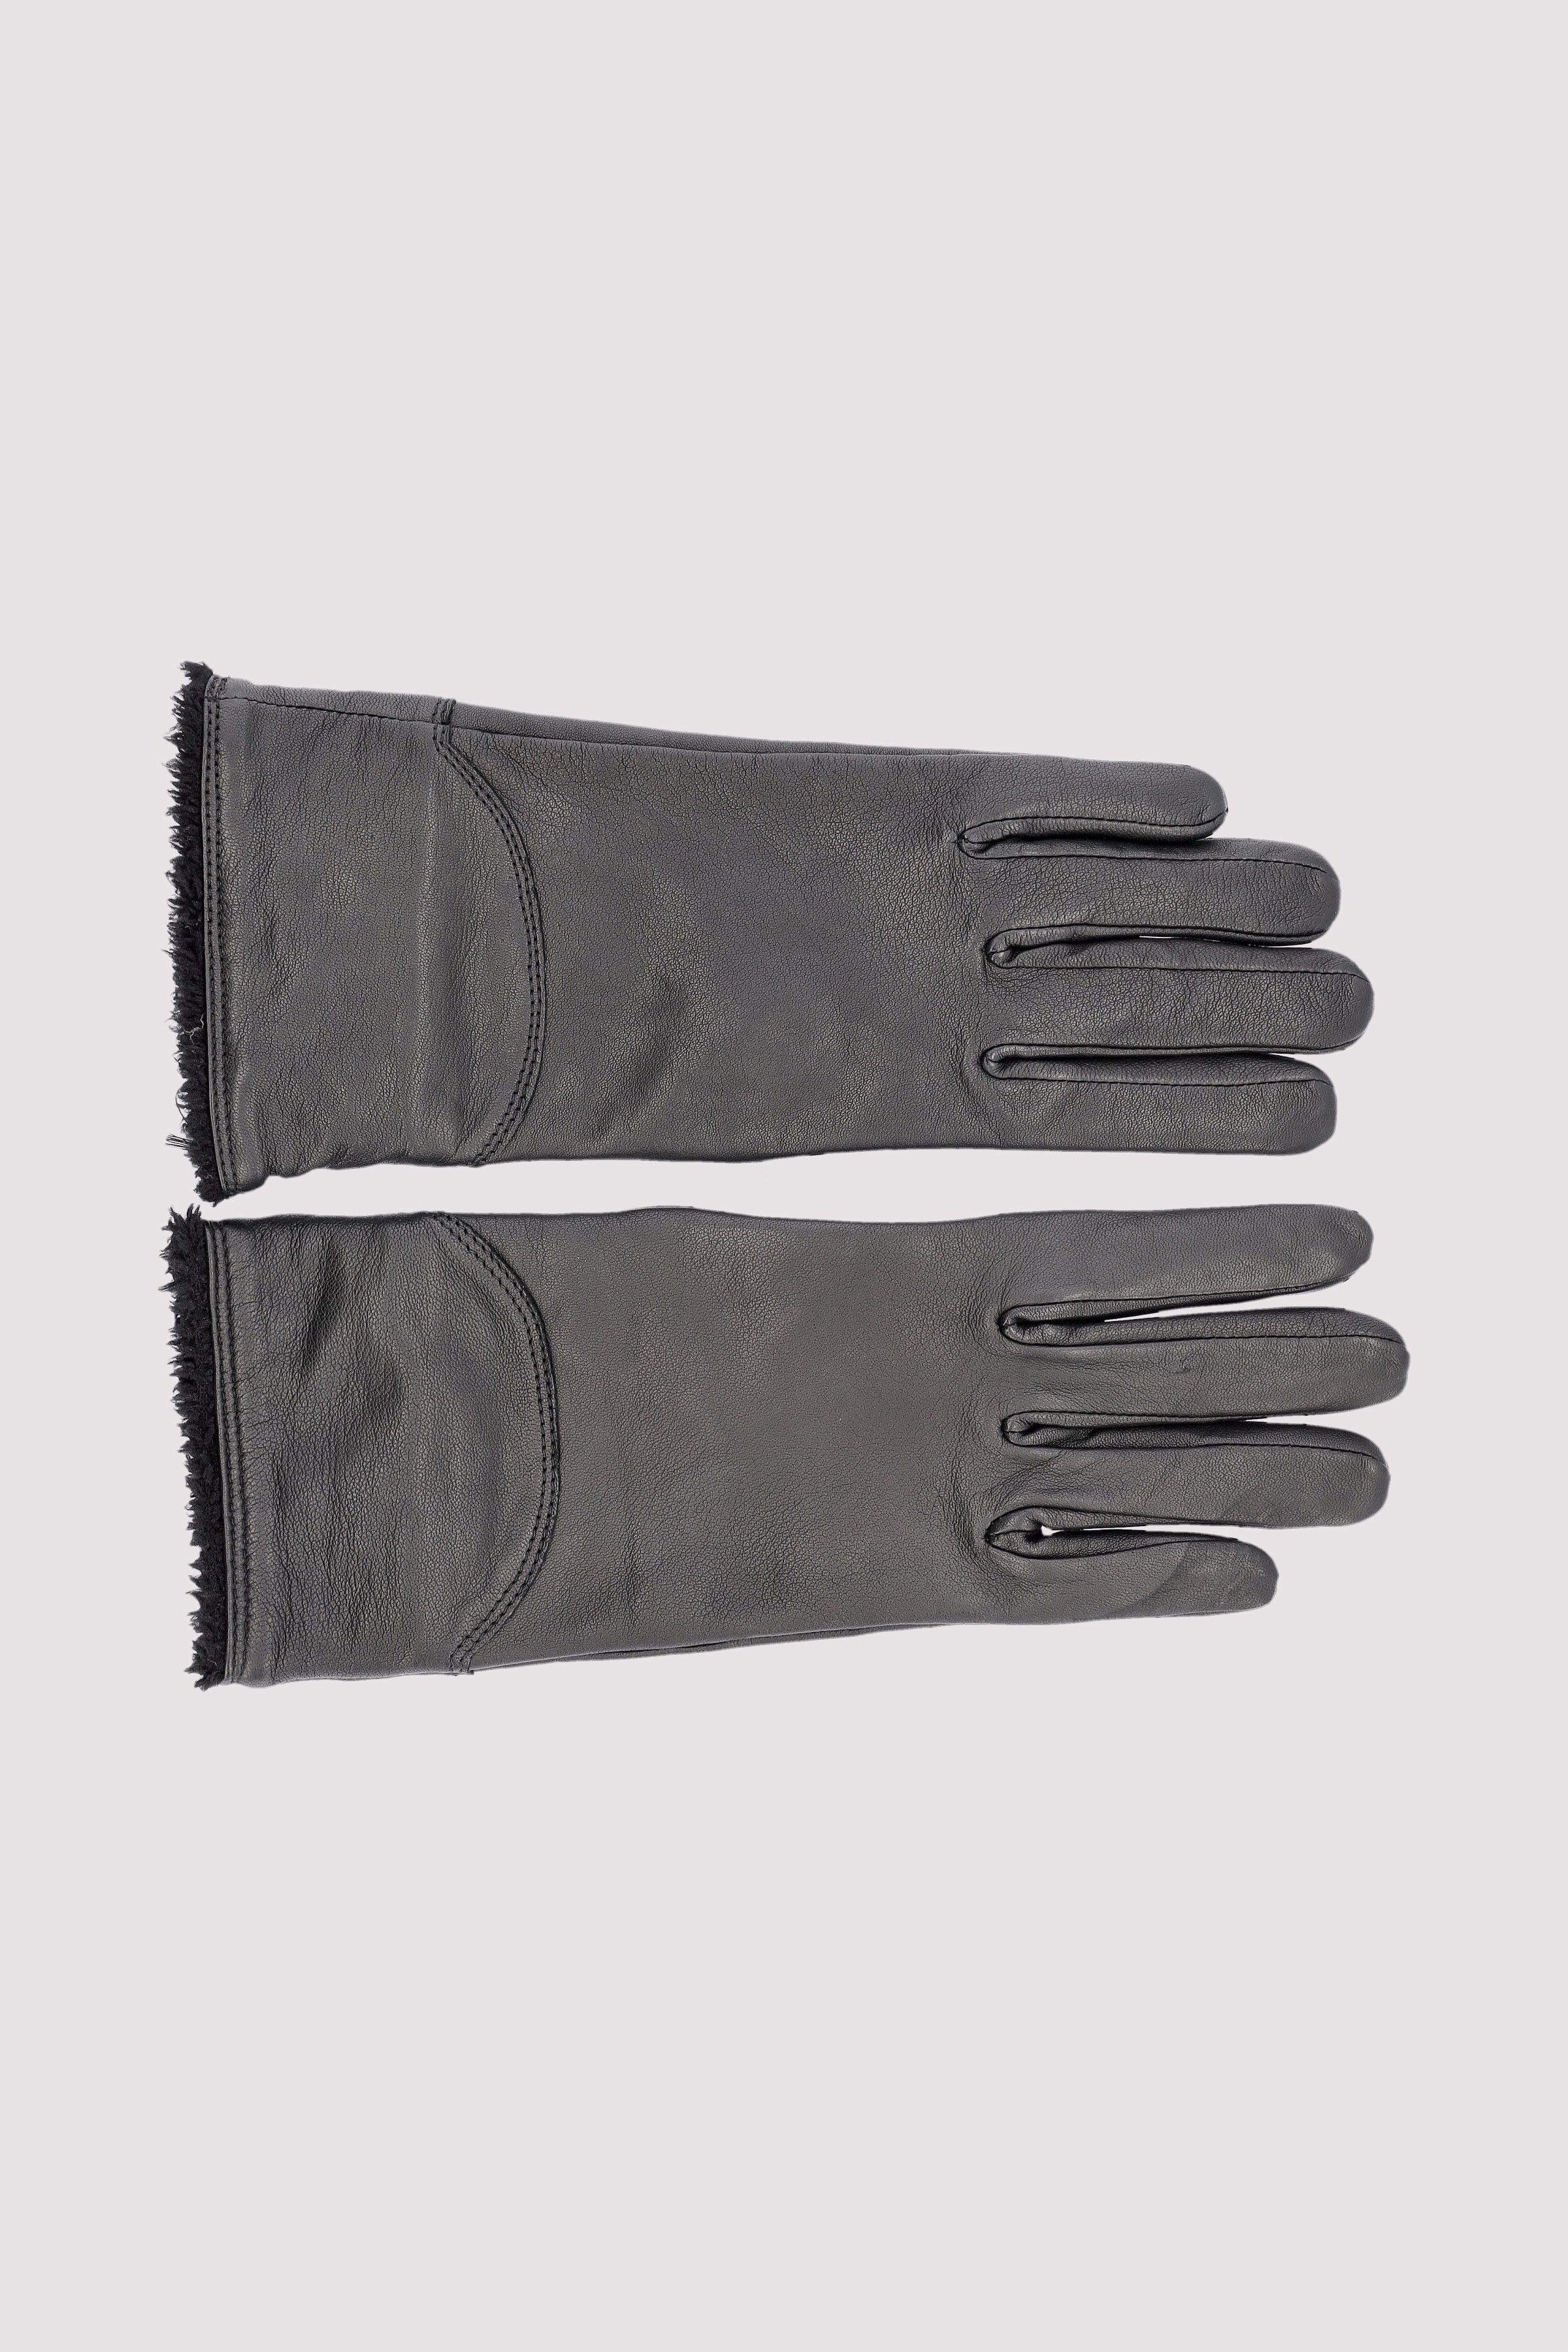 Gloves, leather, curly cuff in